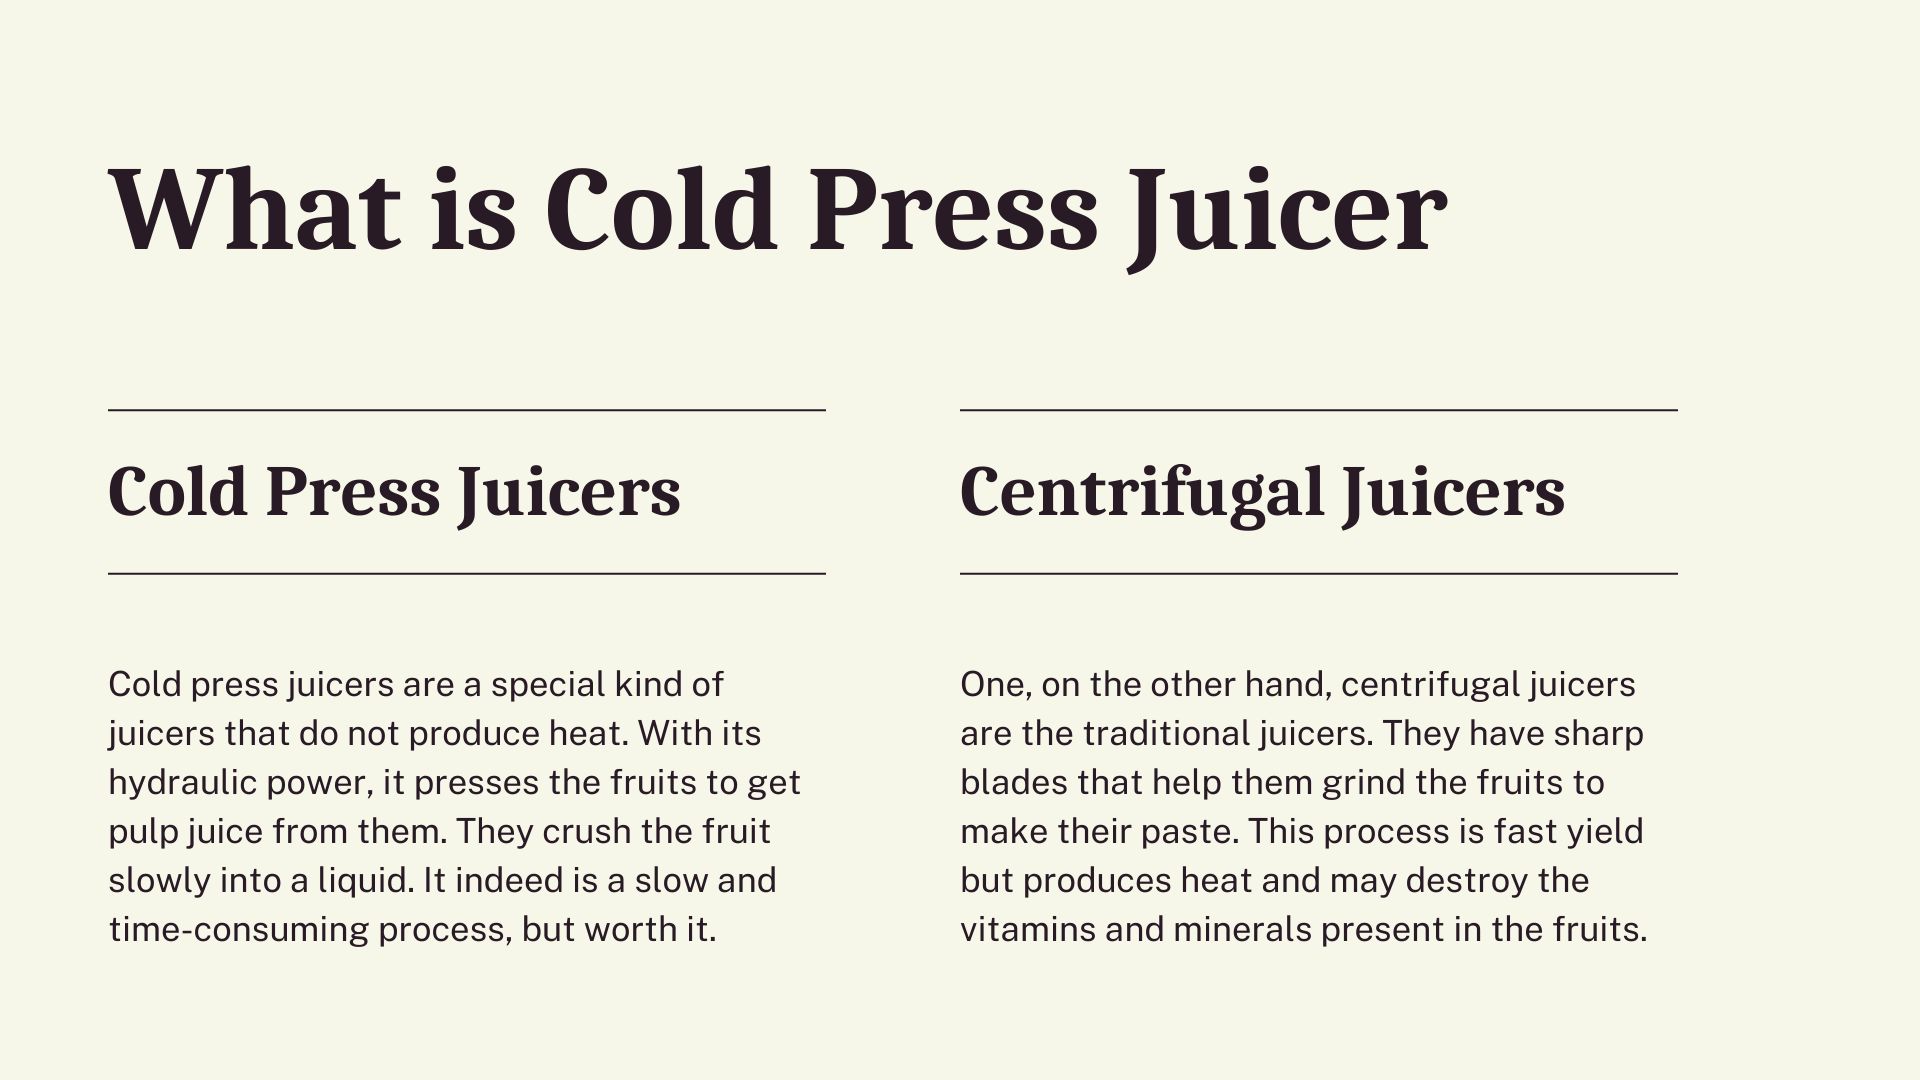 What is Cold Press Juicer